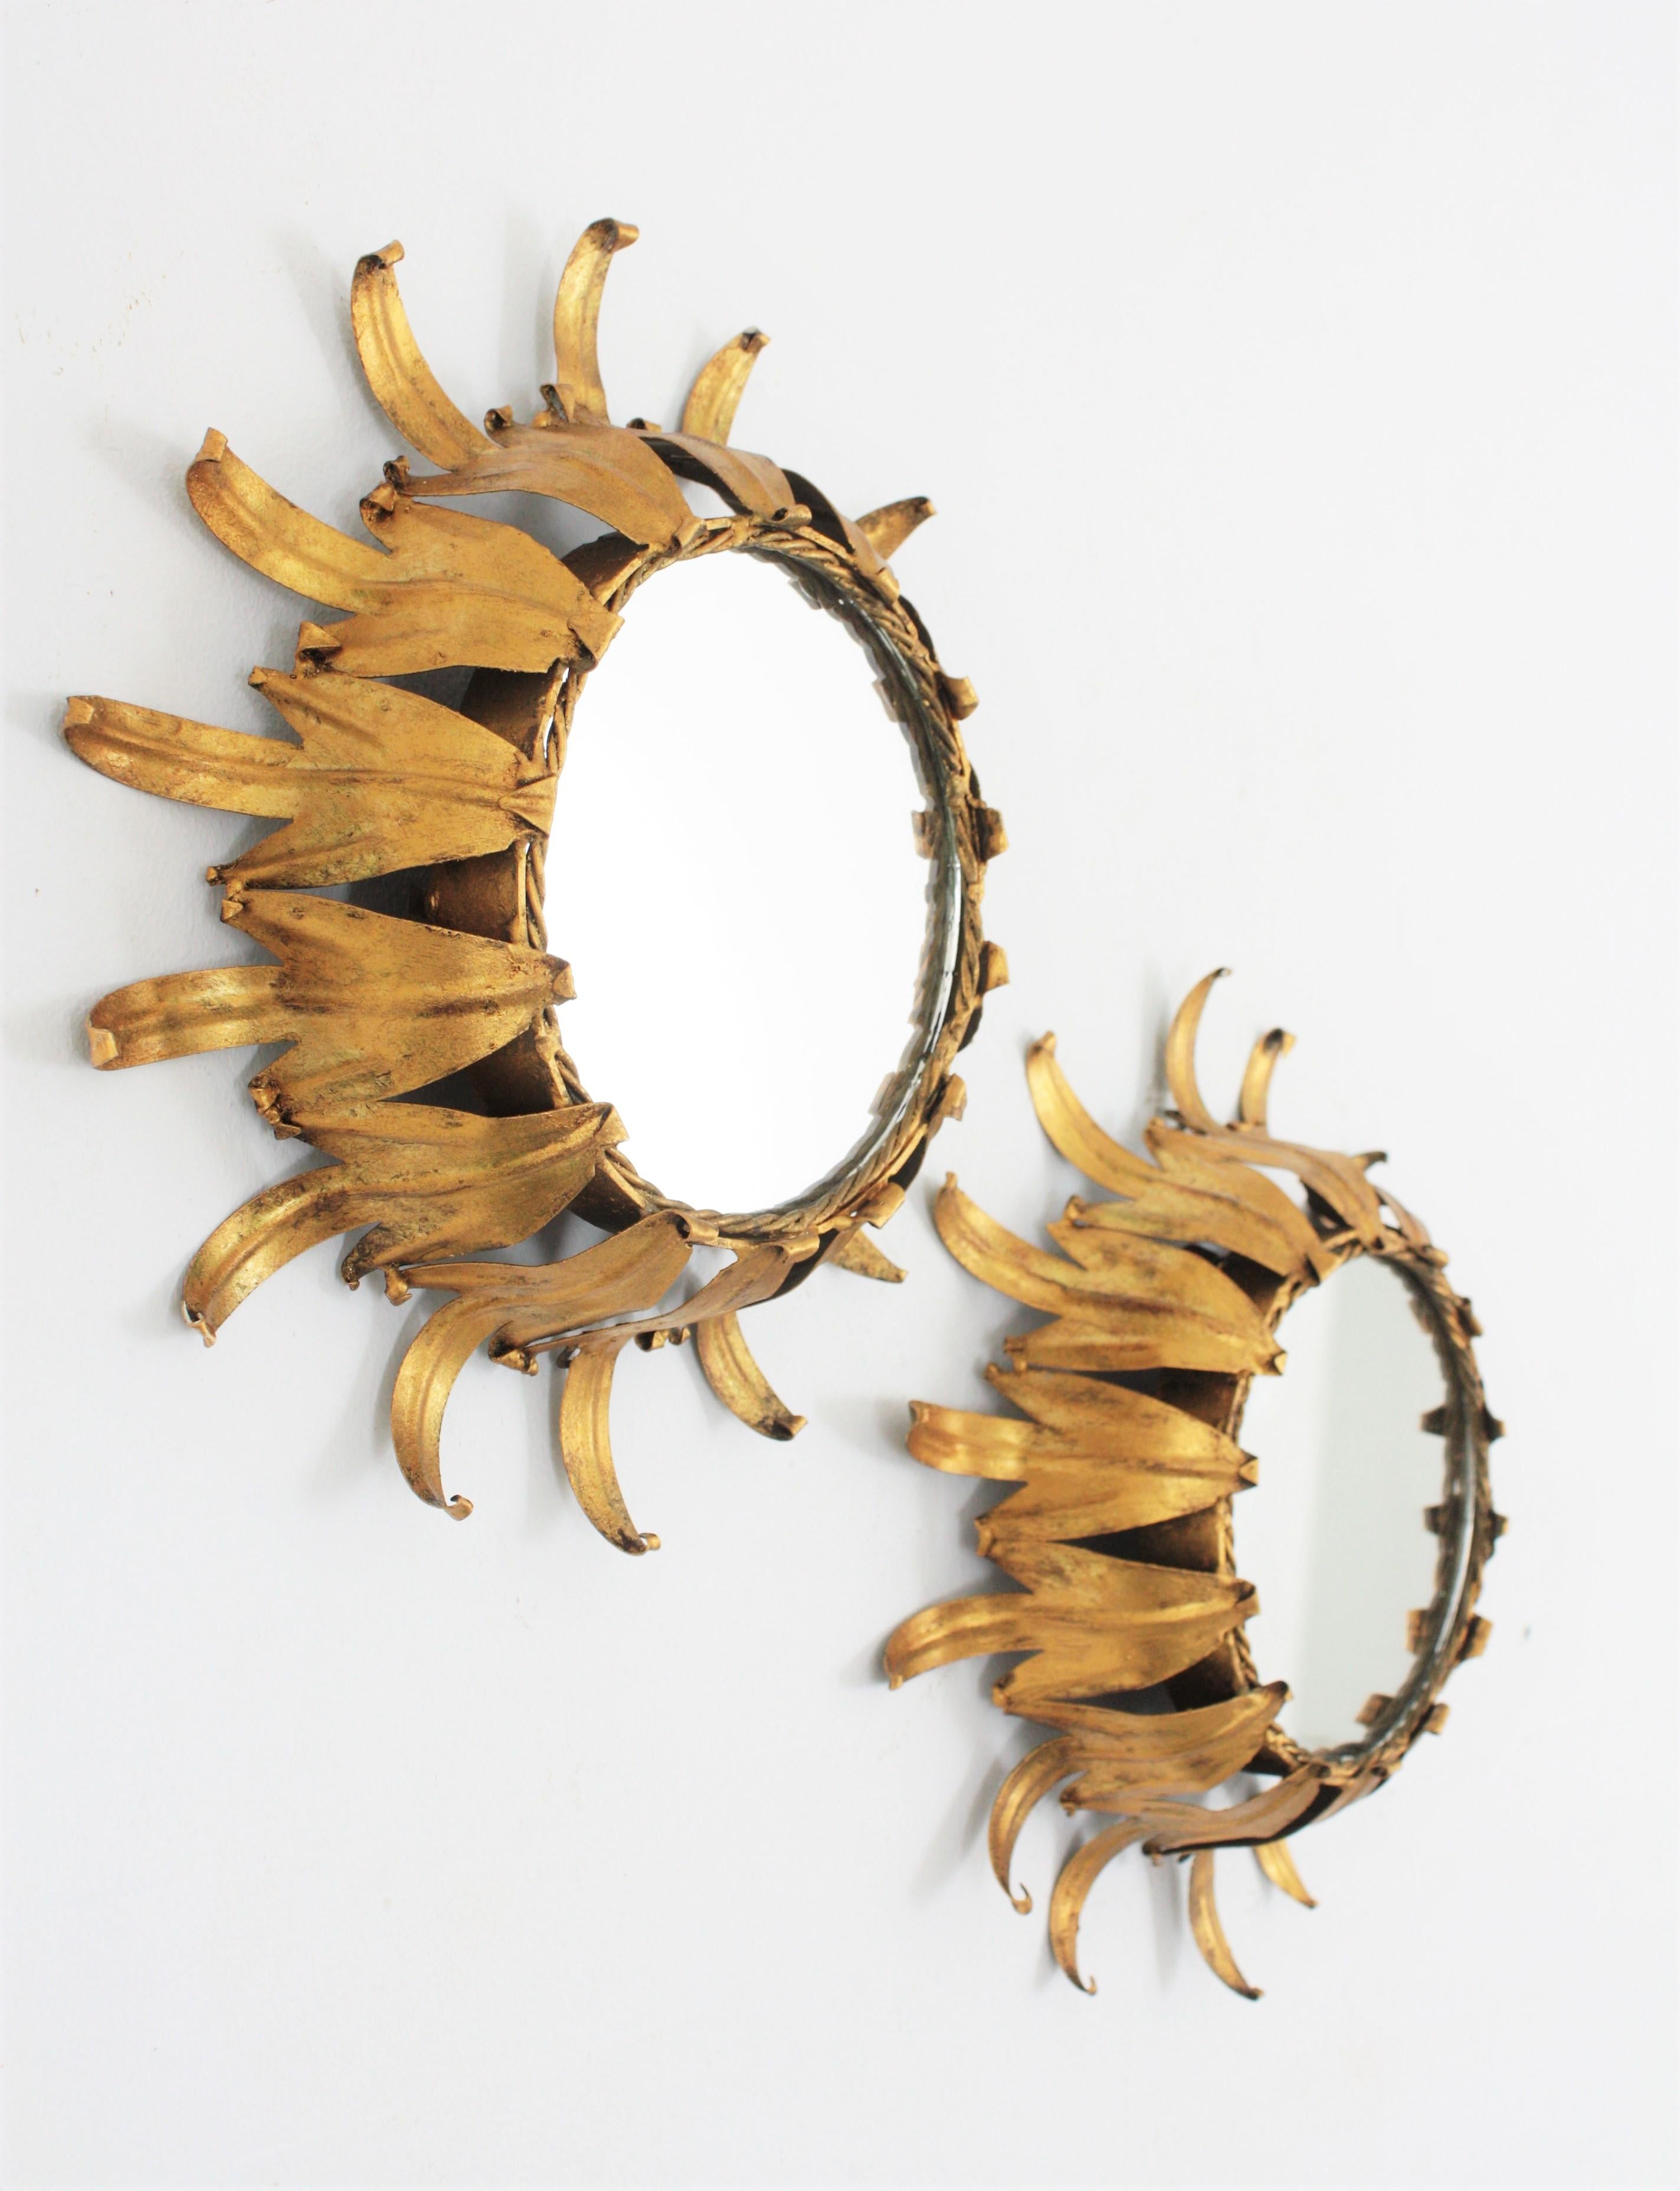 Spanish Pair of Sunburst Wall Mirrors in Gilt Iron in the Style of Hollywood Regency